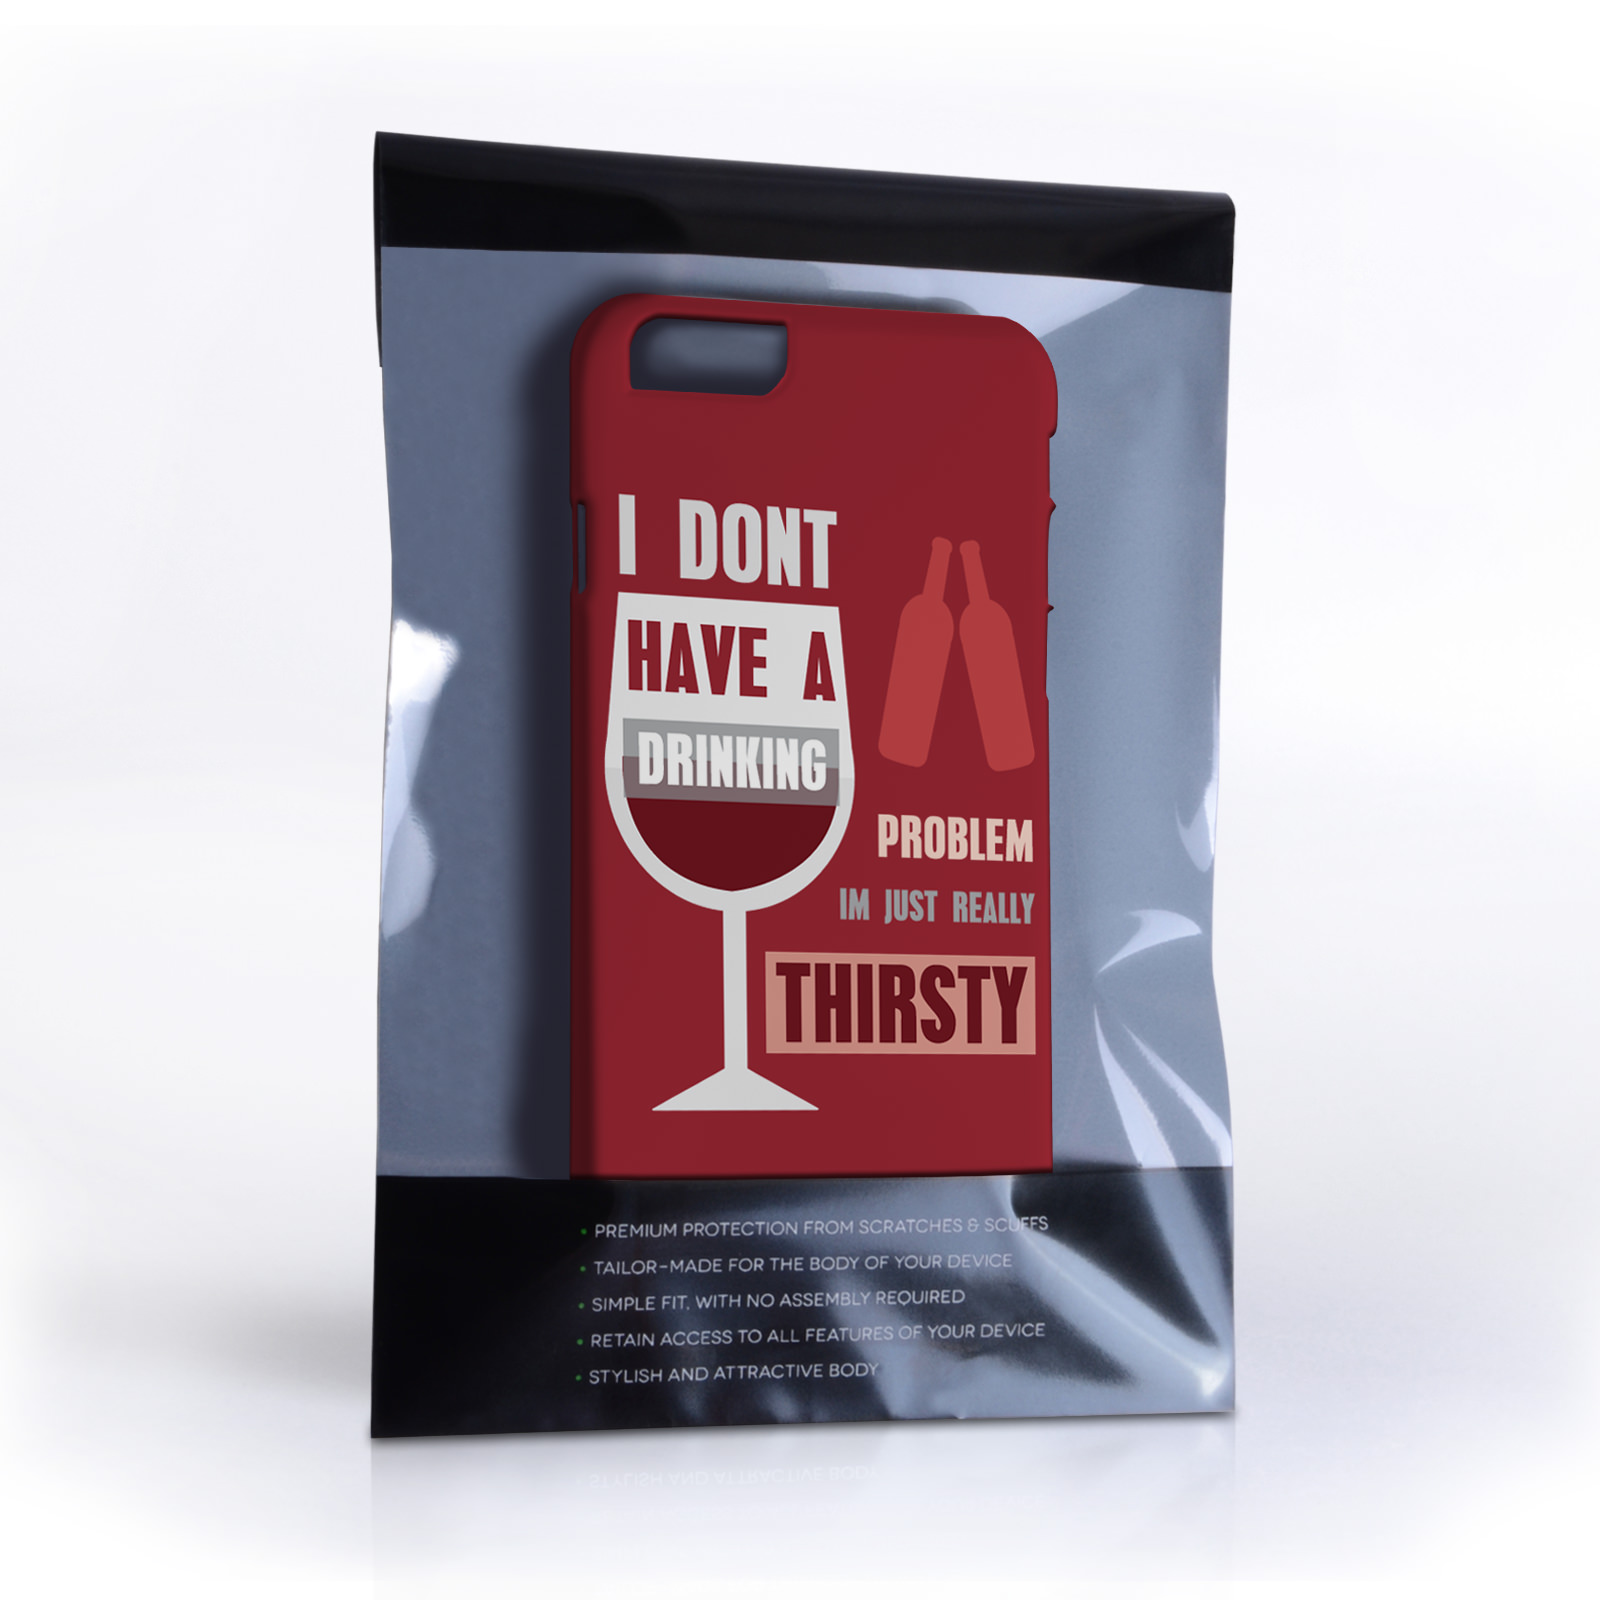 Caseflex iPhone 6 and 6s ‘Really Thirsty’ Quote Hard Case – Red